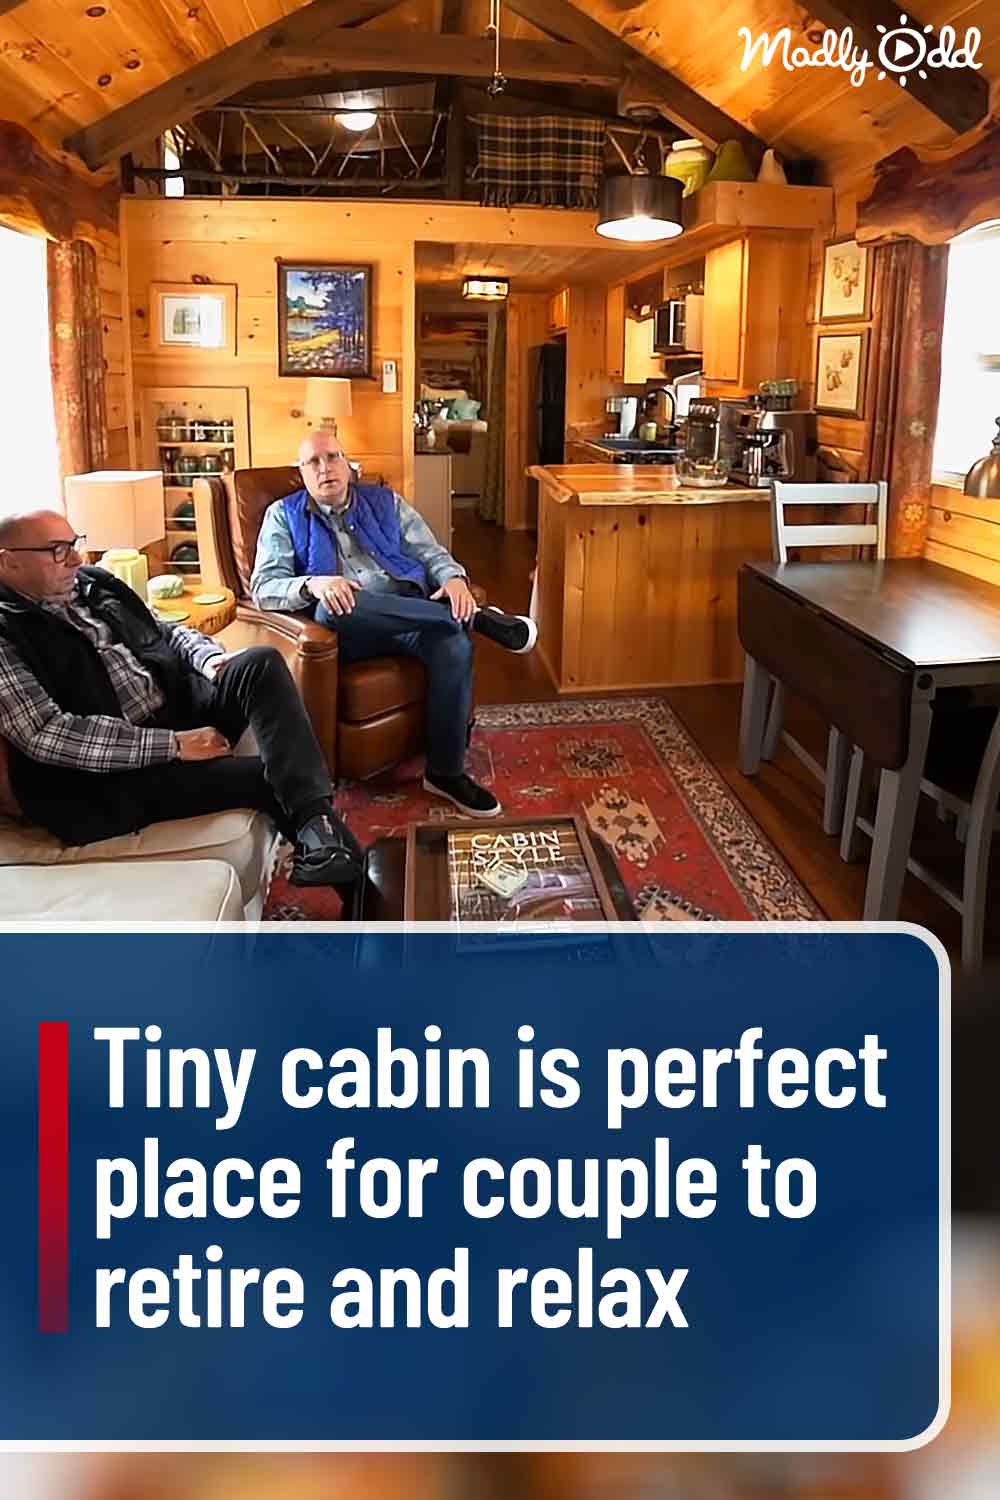 Tiny cabin is perfect place for couple to retire and relax